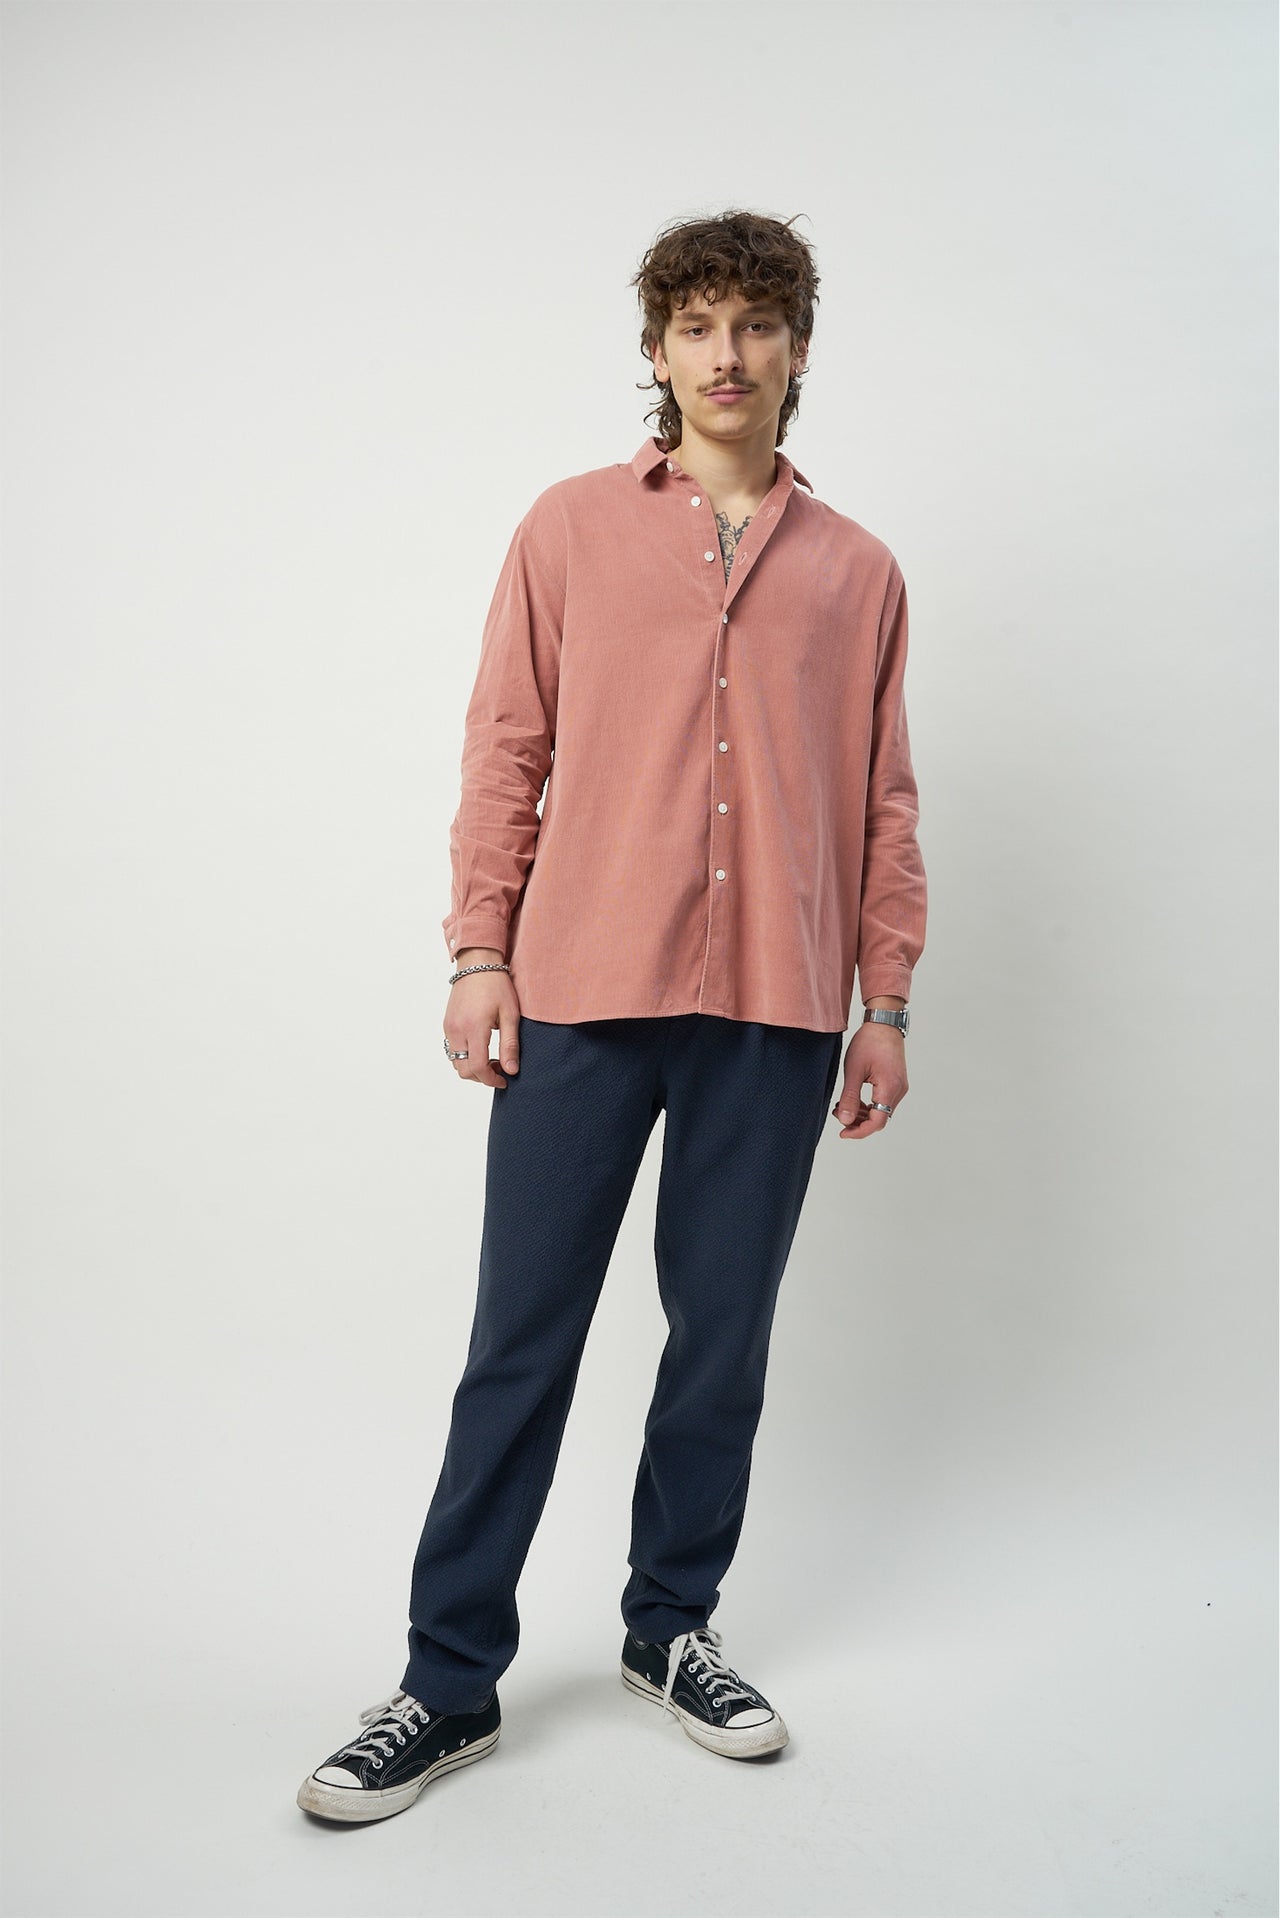 Boxy Unisex Shirt in Dusty Pink in the finest Japanese Baby Corduroy Cotton